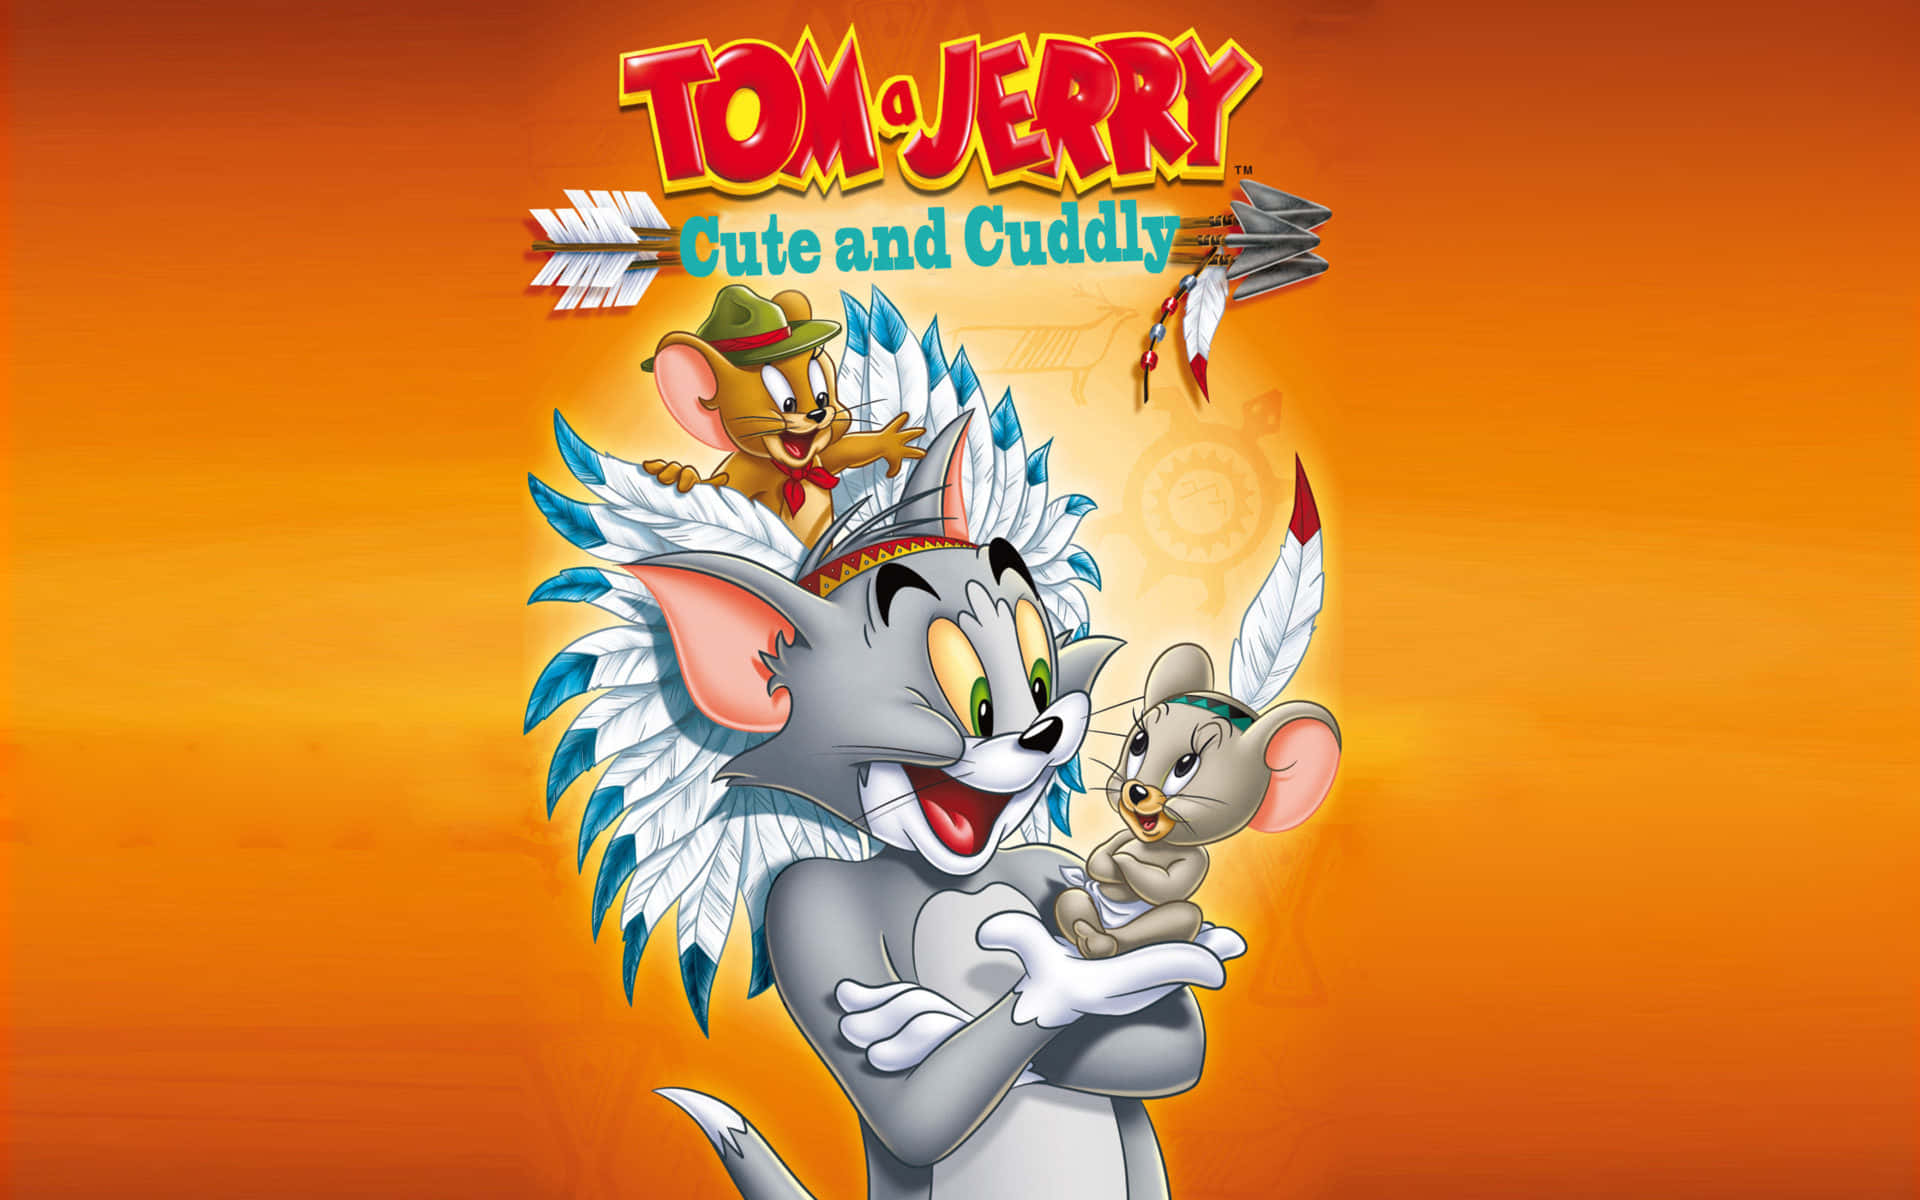 Tom and Jerry duke it out in this classic cartoon rivalry